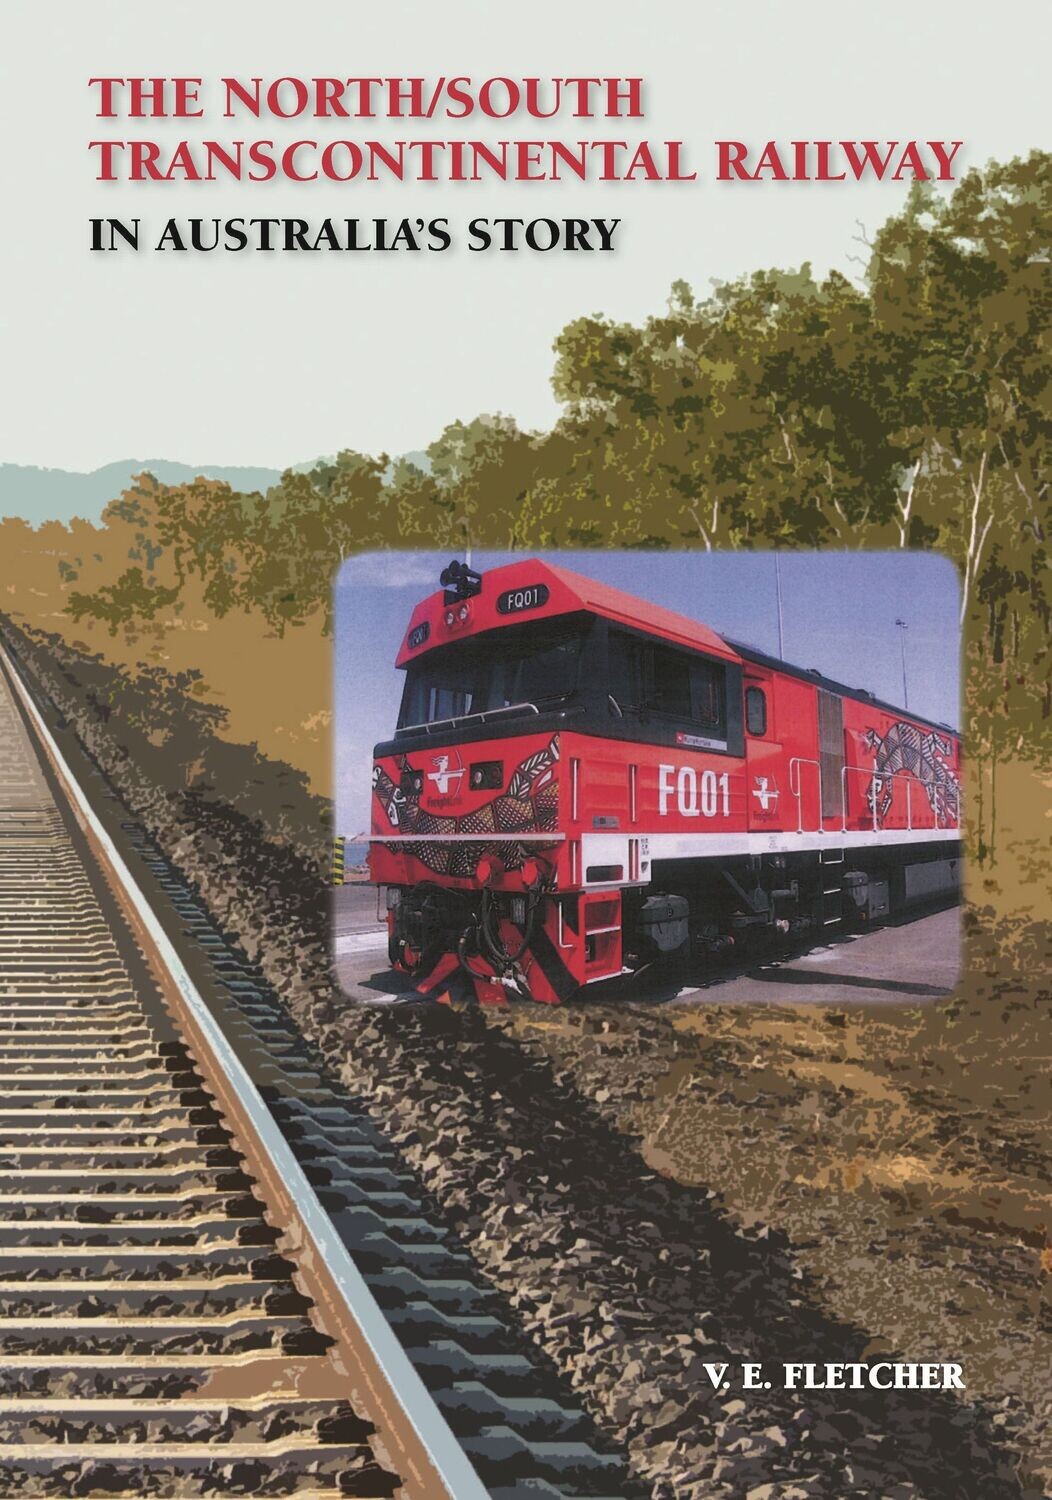 The North/South Transcontinental Railway in Australia’s Story